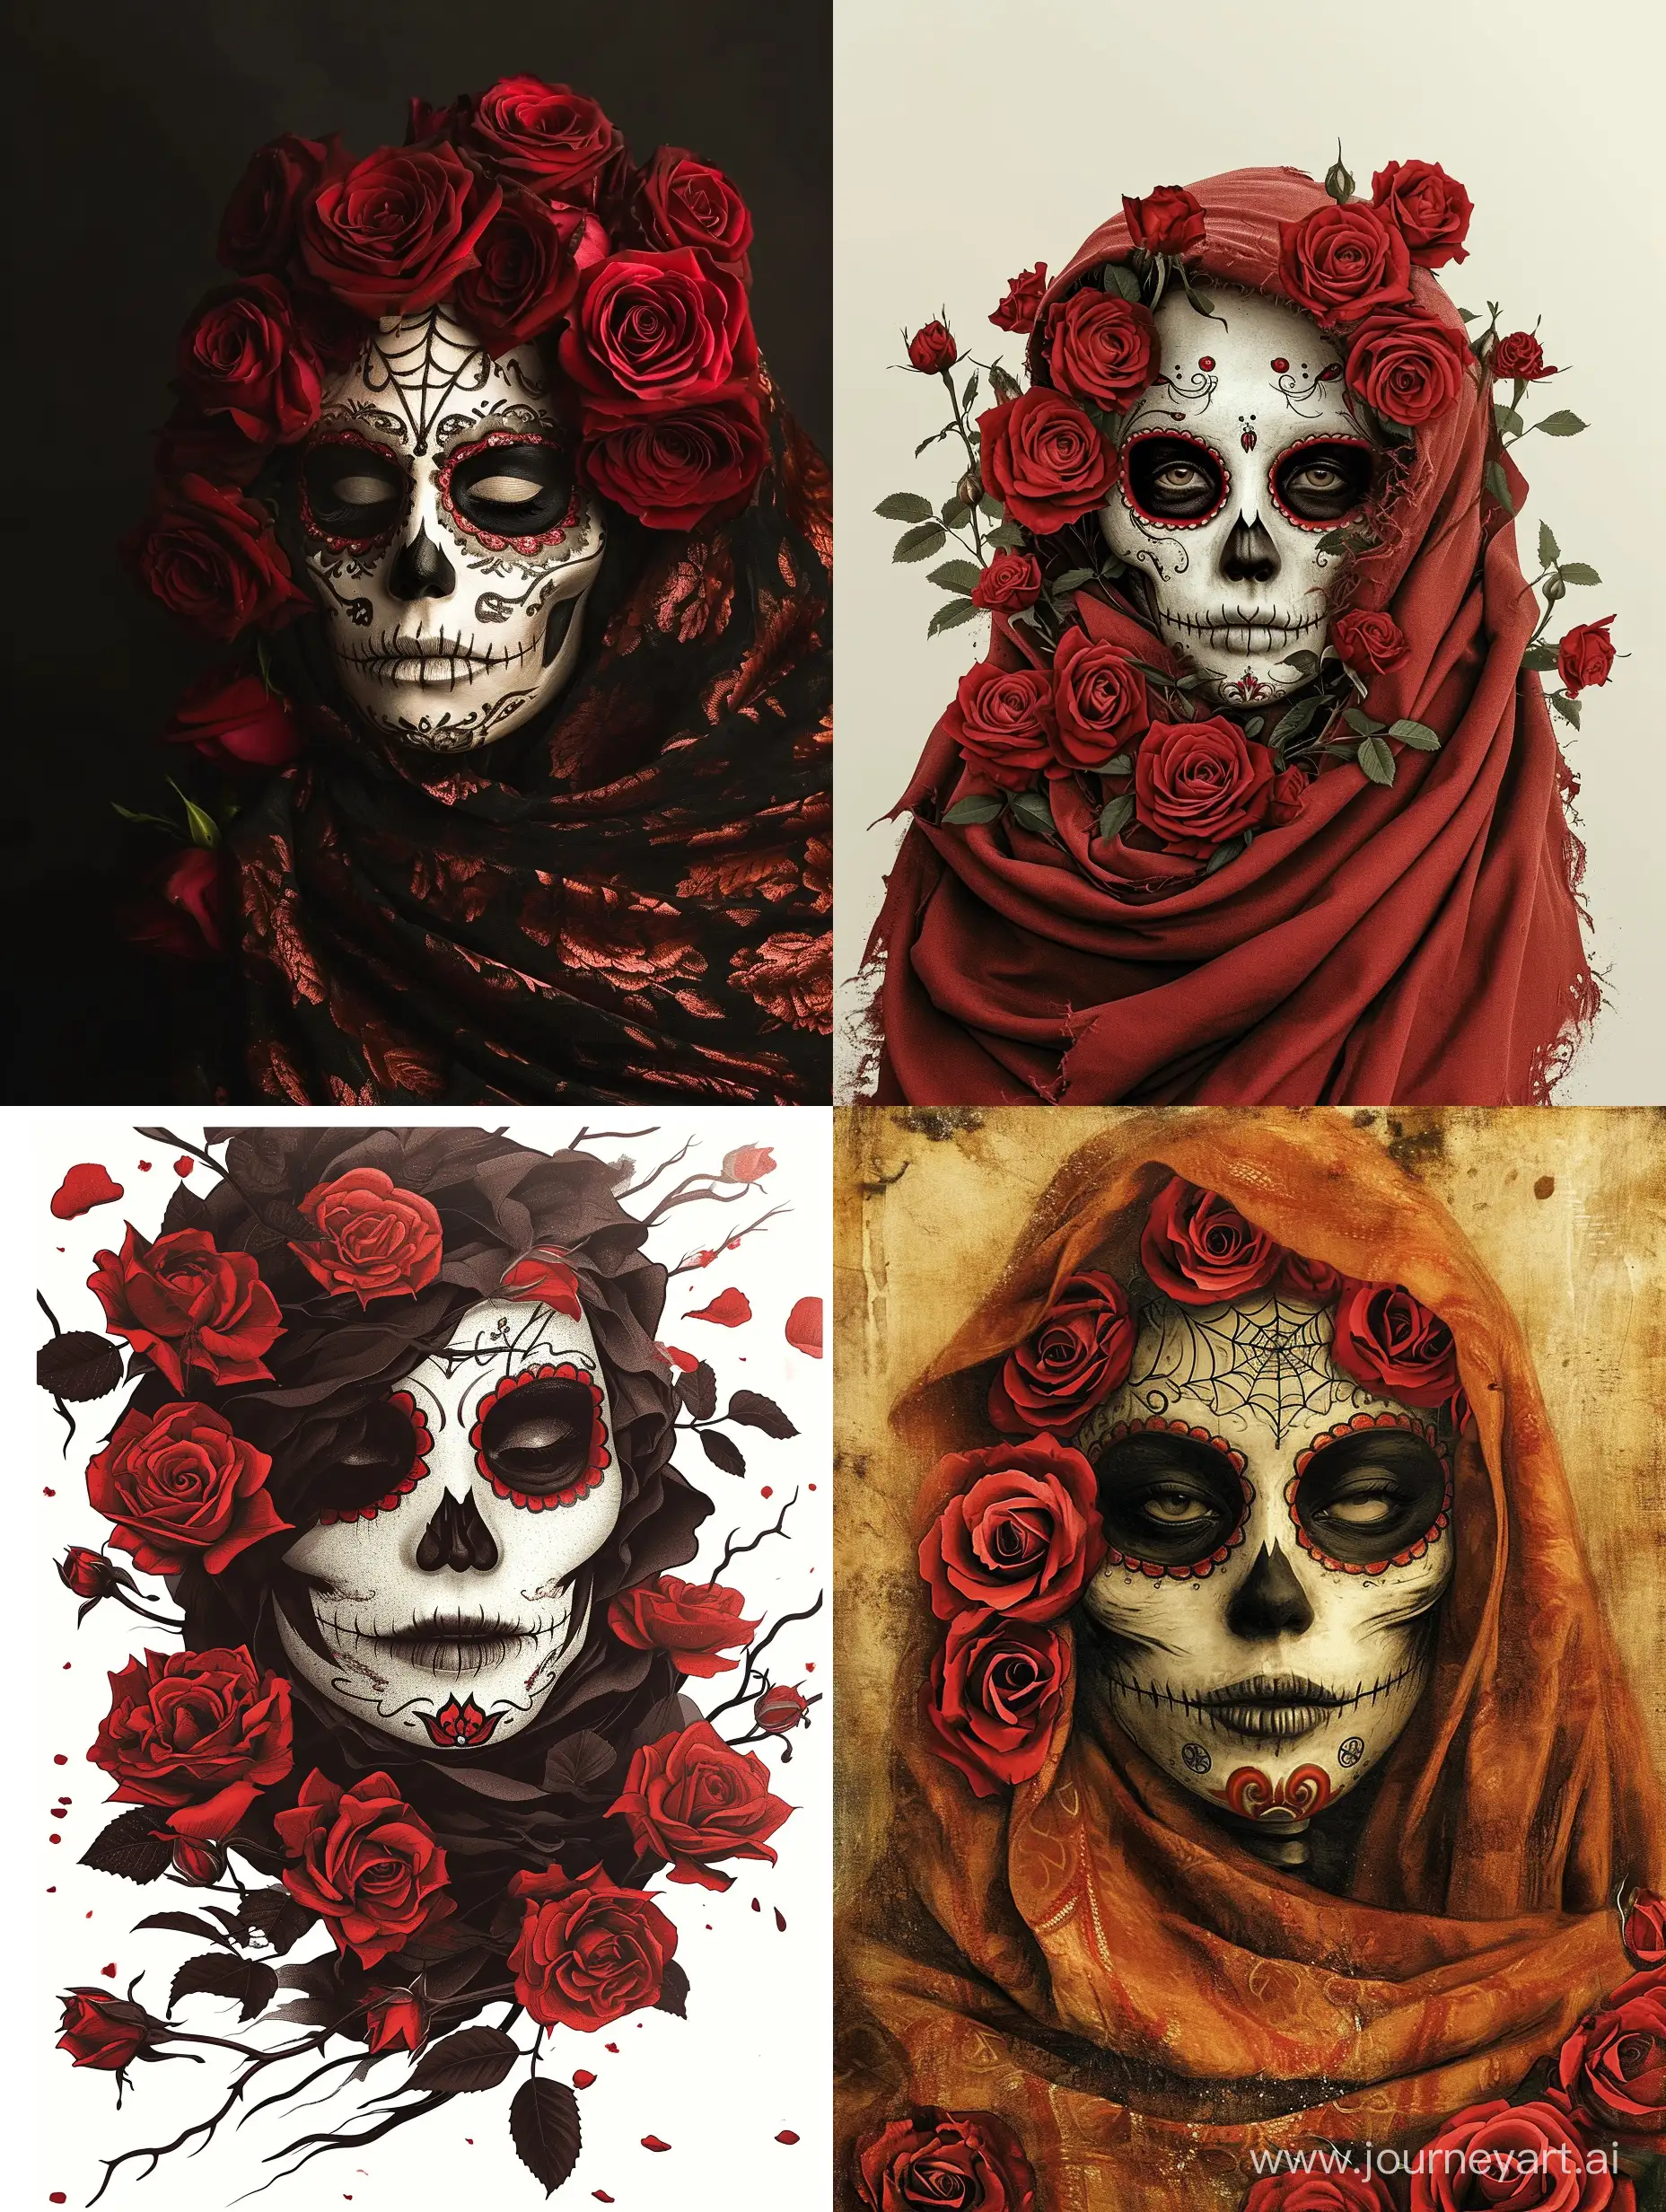 Decaying-Beauty-Sugar-Skull-Woman-Surrounded-by-Dissolving-Roses